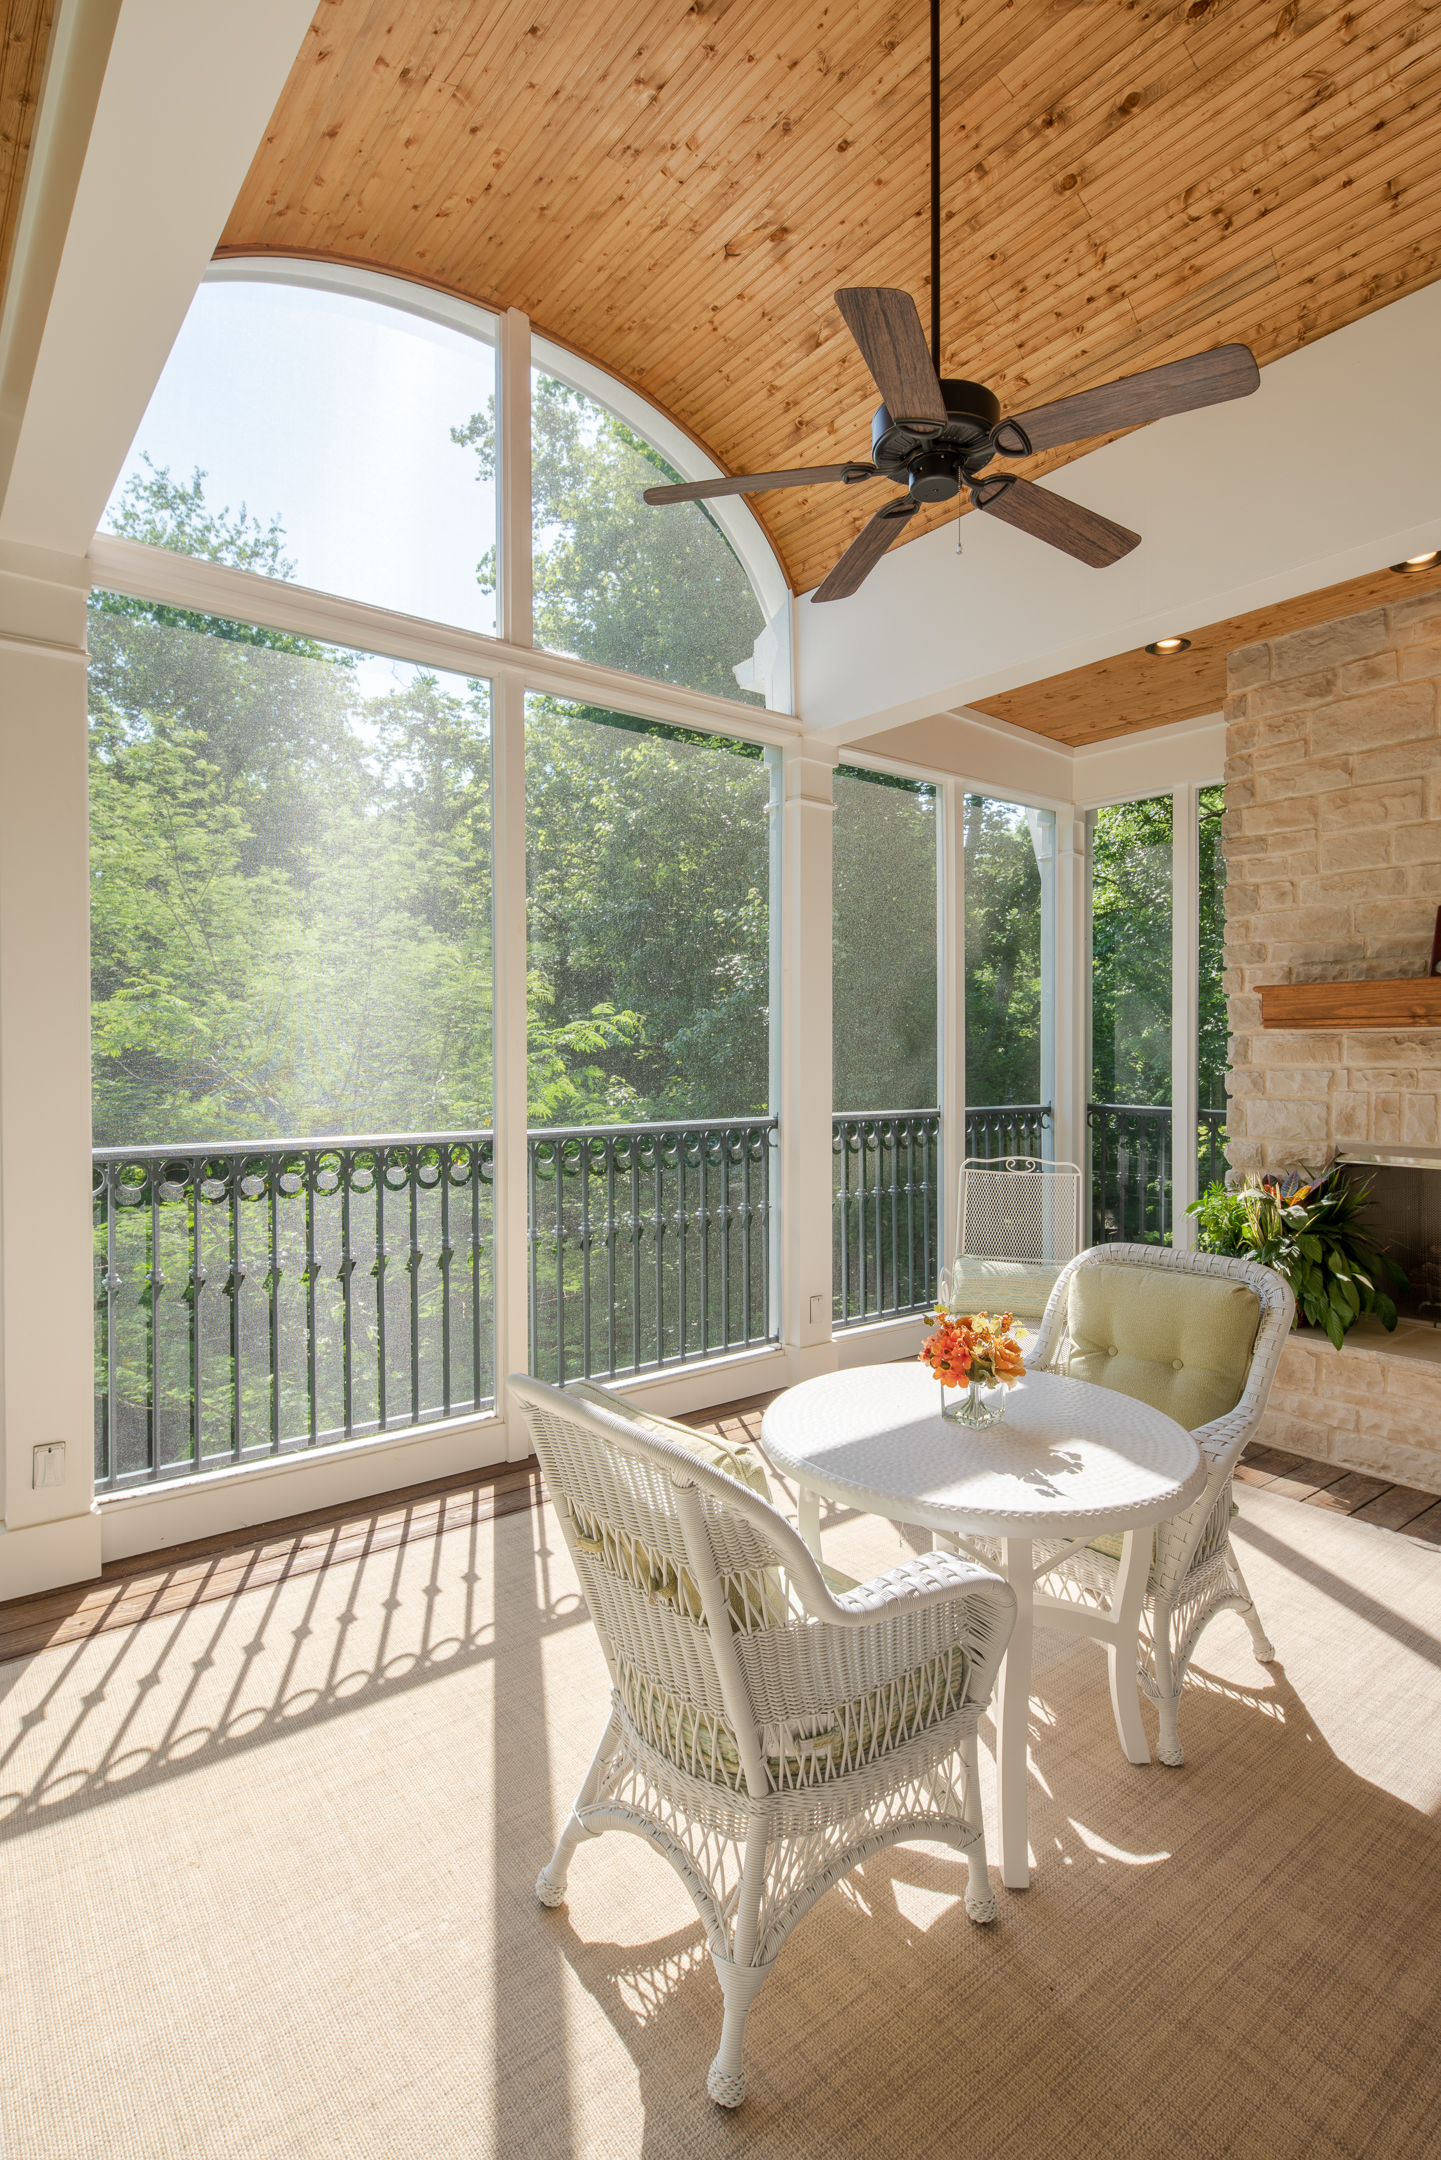 Nuances of screened porch ceilings: Which design, and why